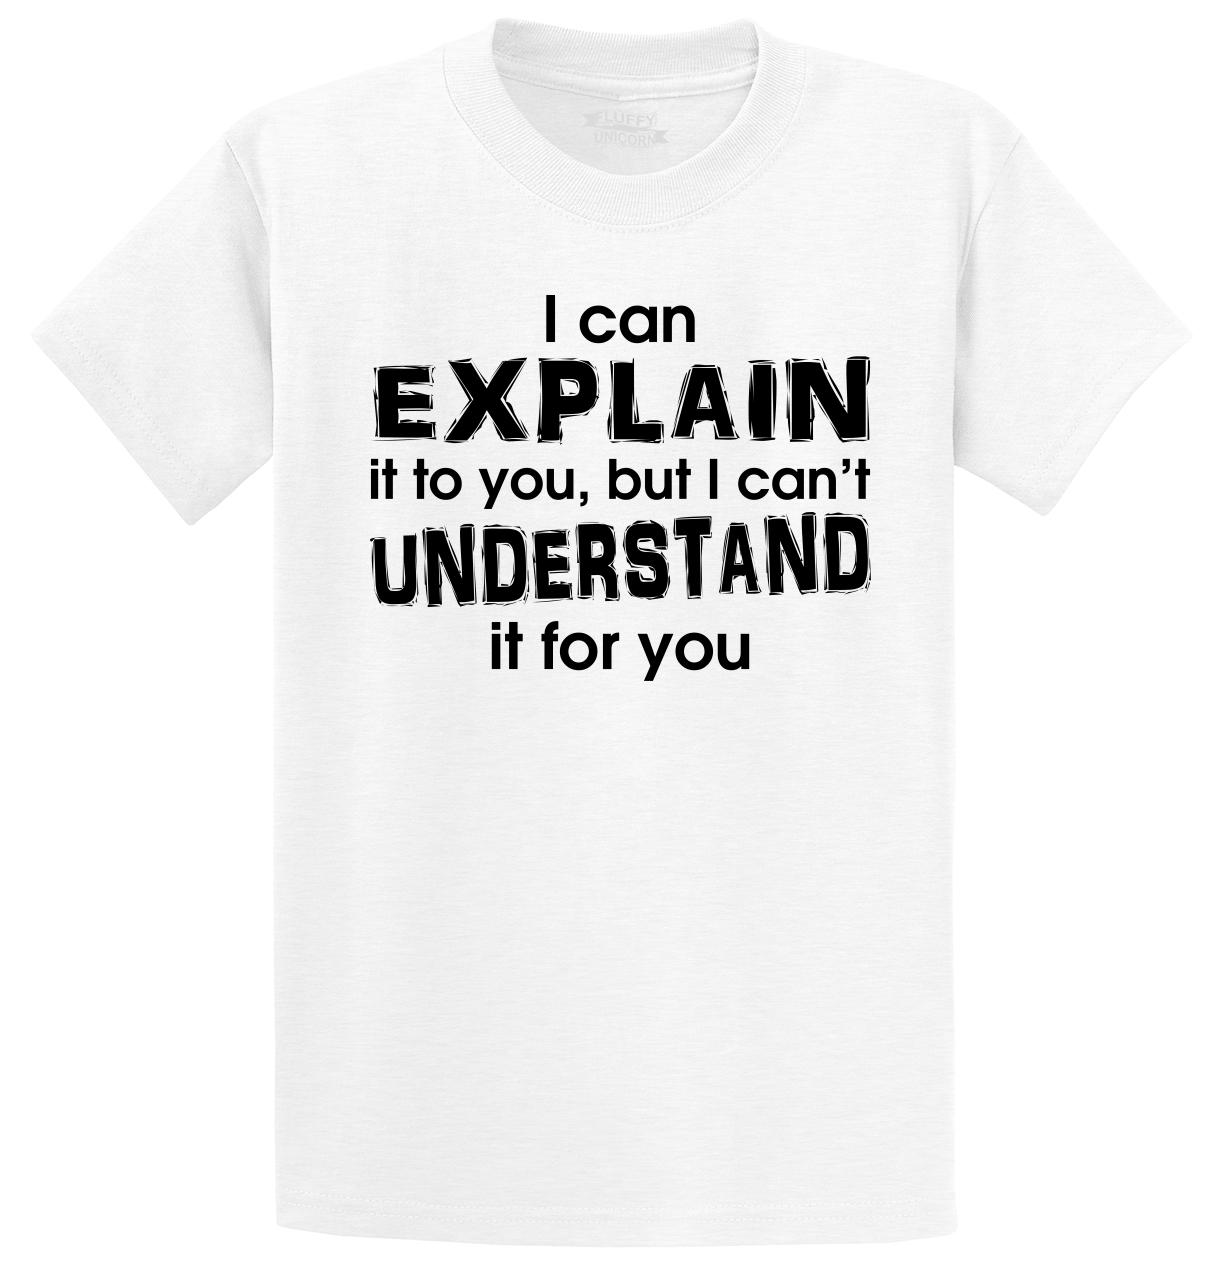 I Can Explain It Funny T Shirt Sarcastic Humor Mean College T Tee S 5xl Ebay